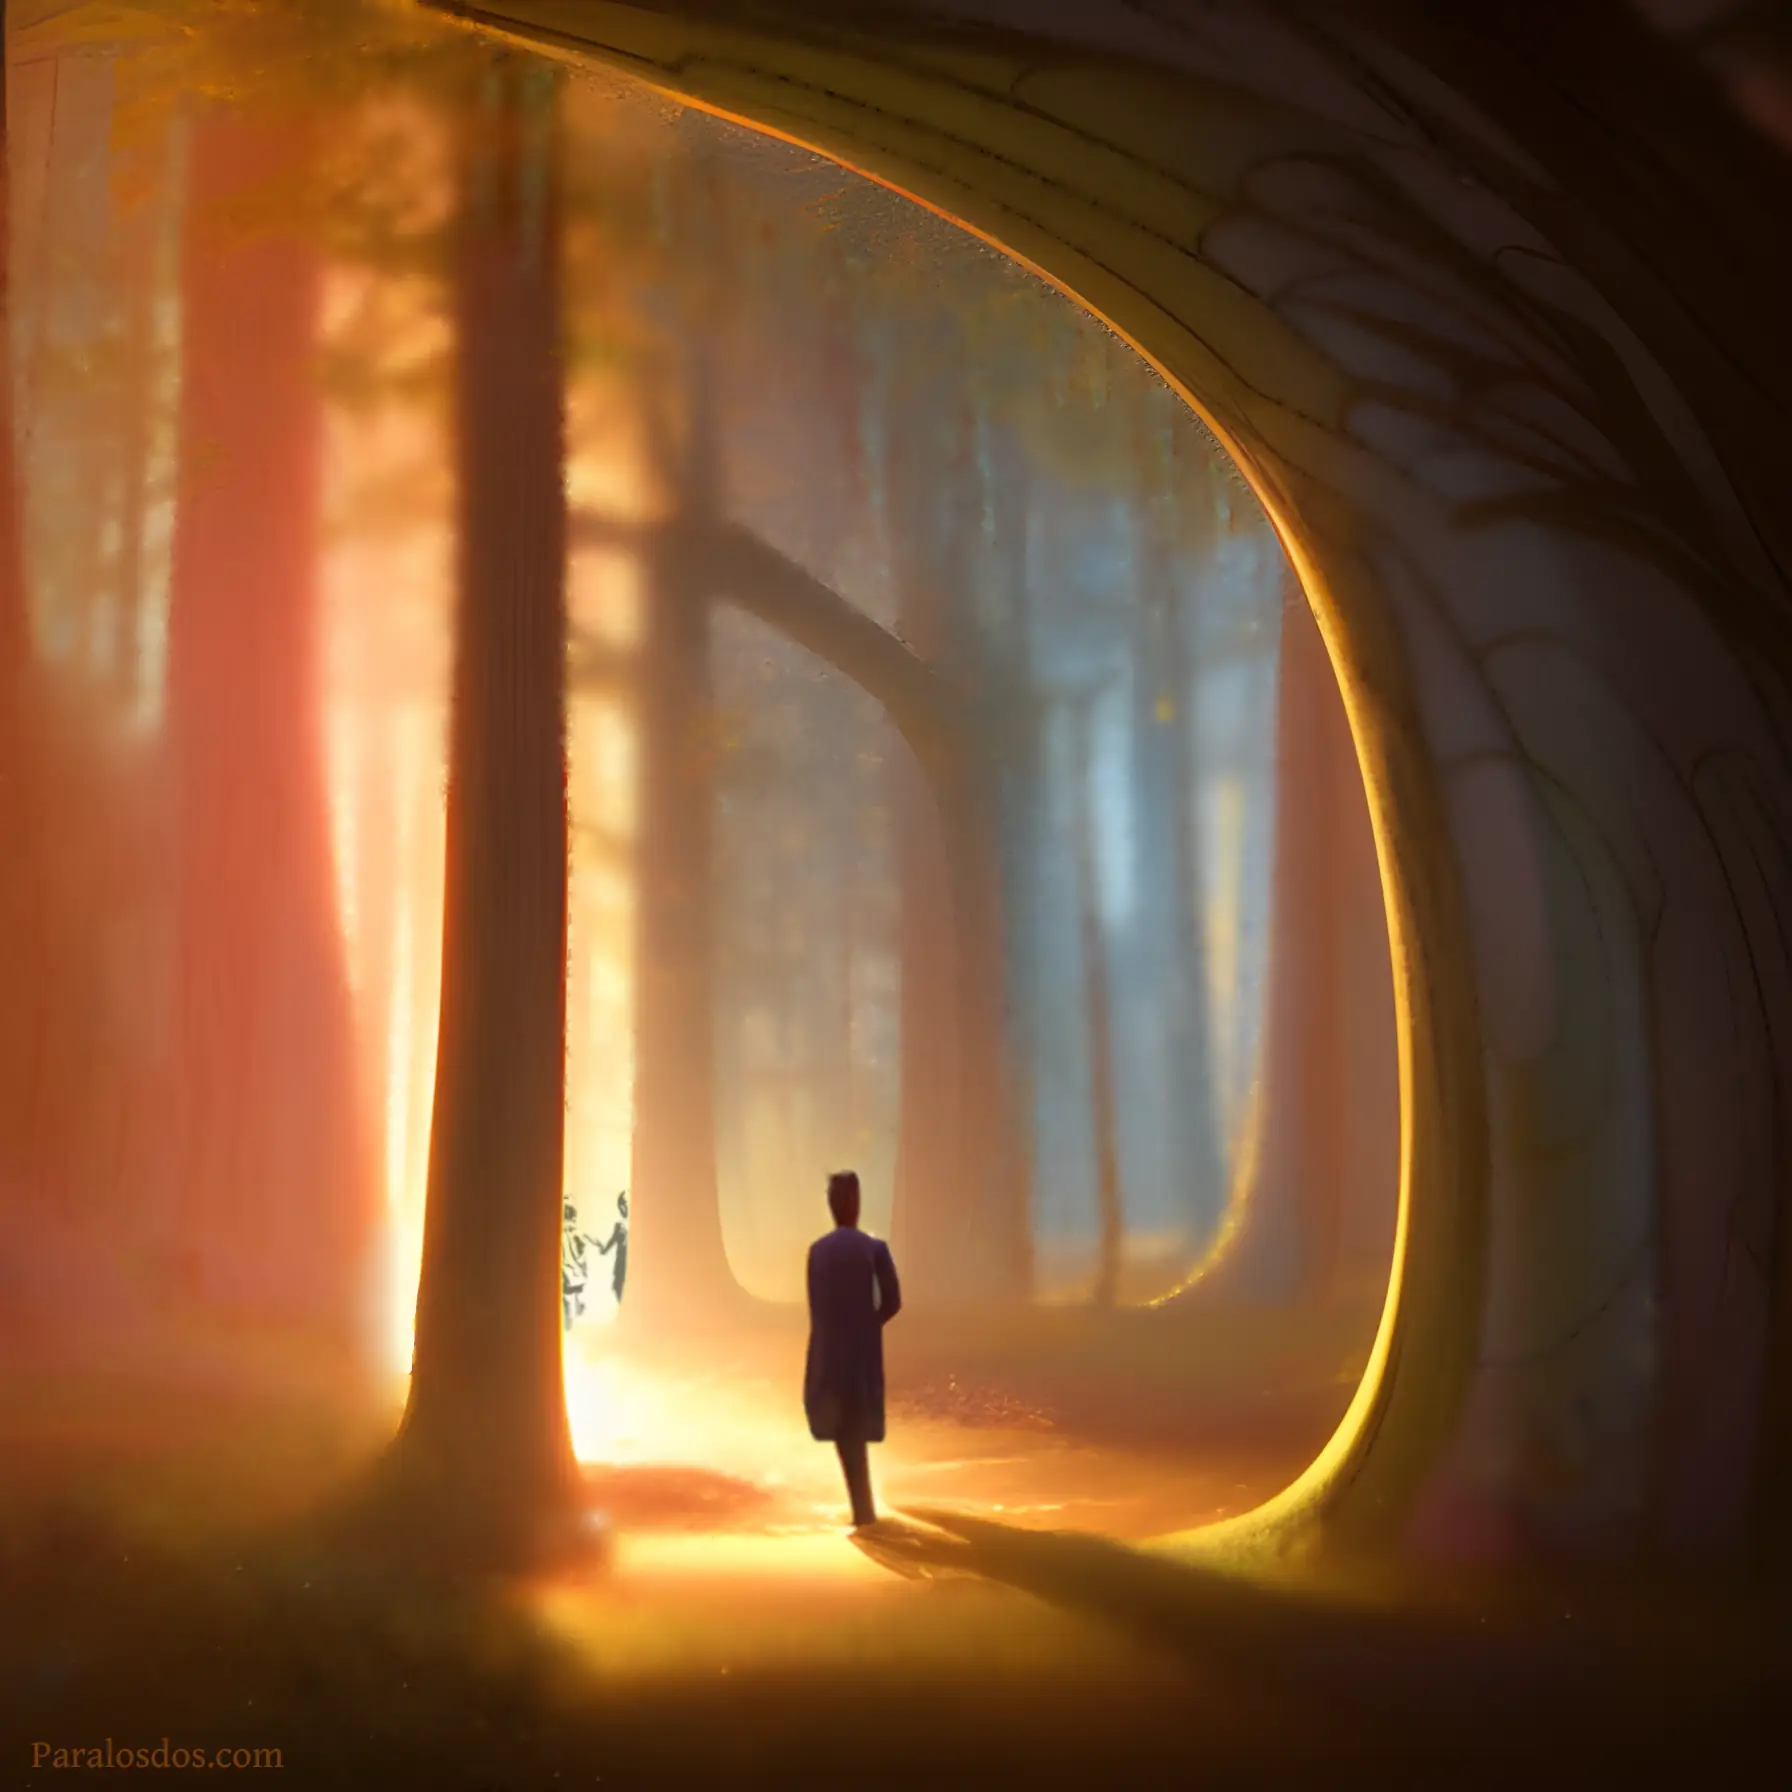 An artistic rendering of a figure in a fantastical forest walking towards an eerie light.